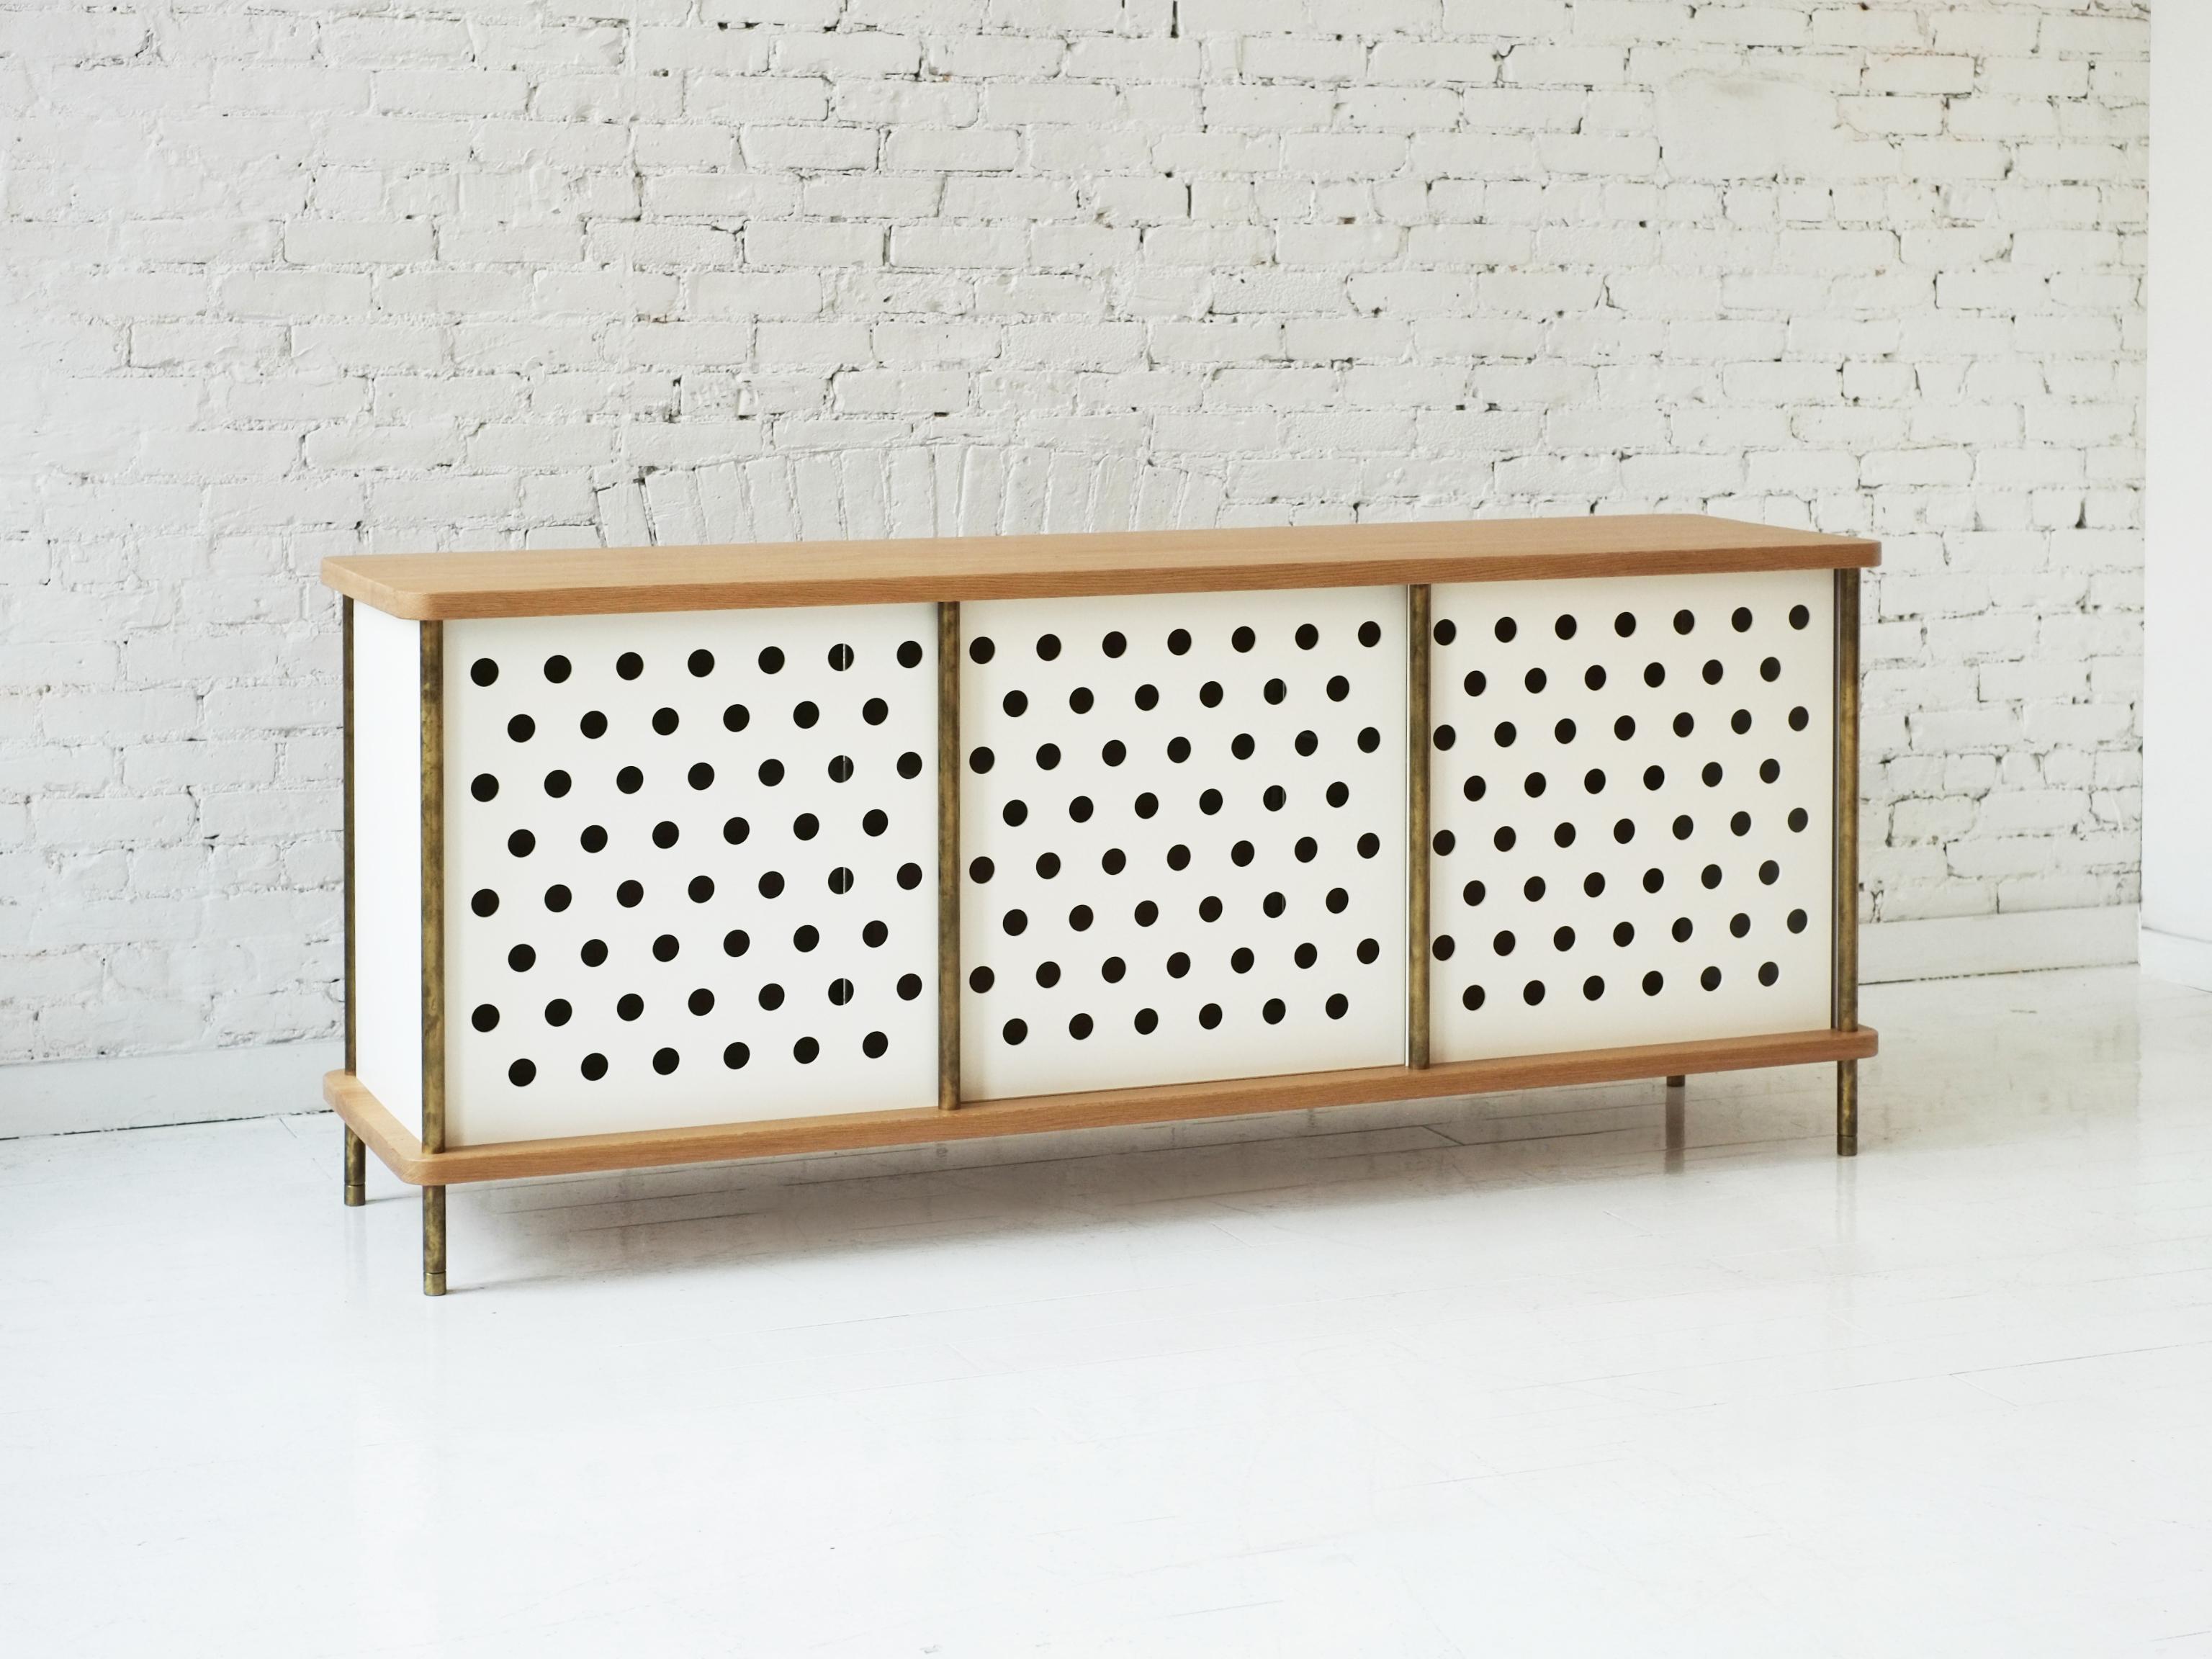 Consistent with the Strata collection, the new Strata Credenza is designed to be modular in order to create versatile configurations tailored to your needs. Immediately available as shown with brass rods, walnut top and four powder coated aluminum